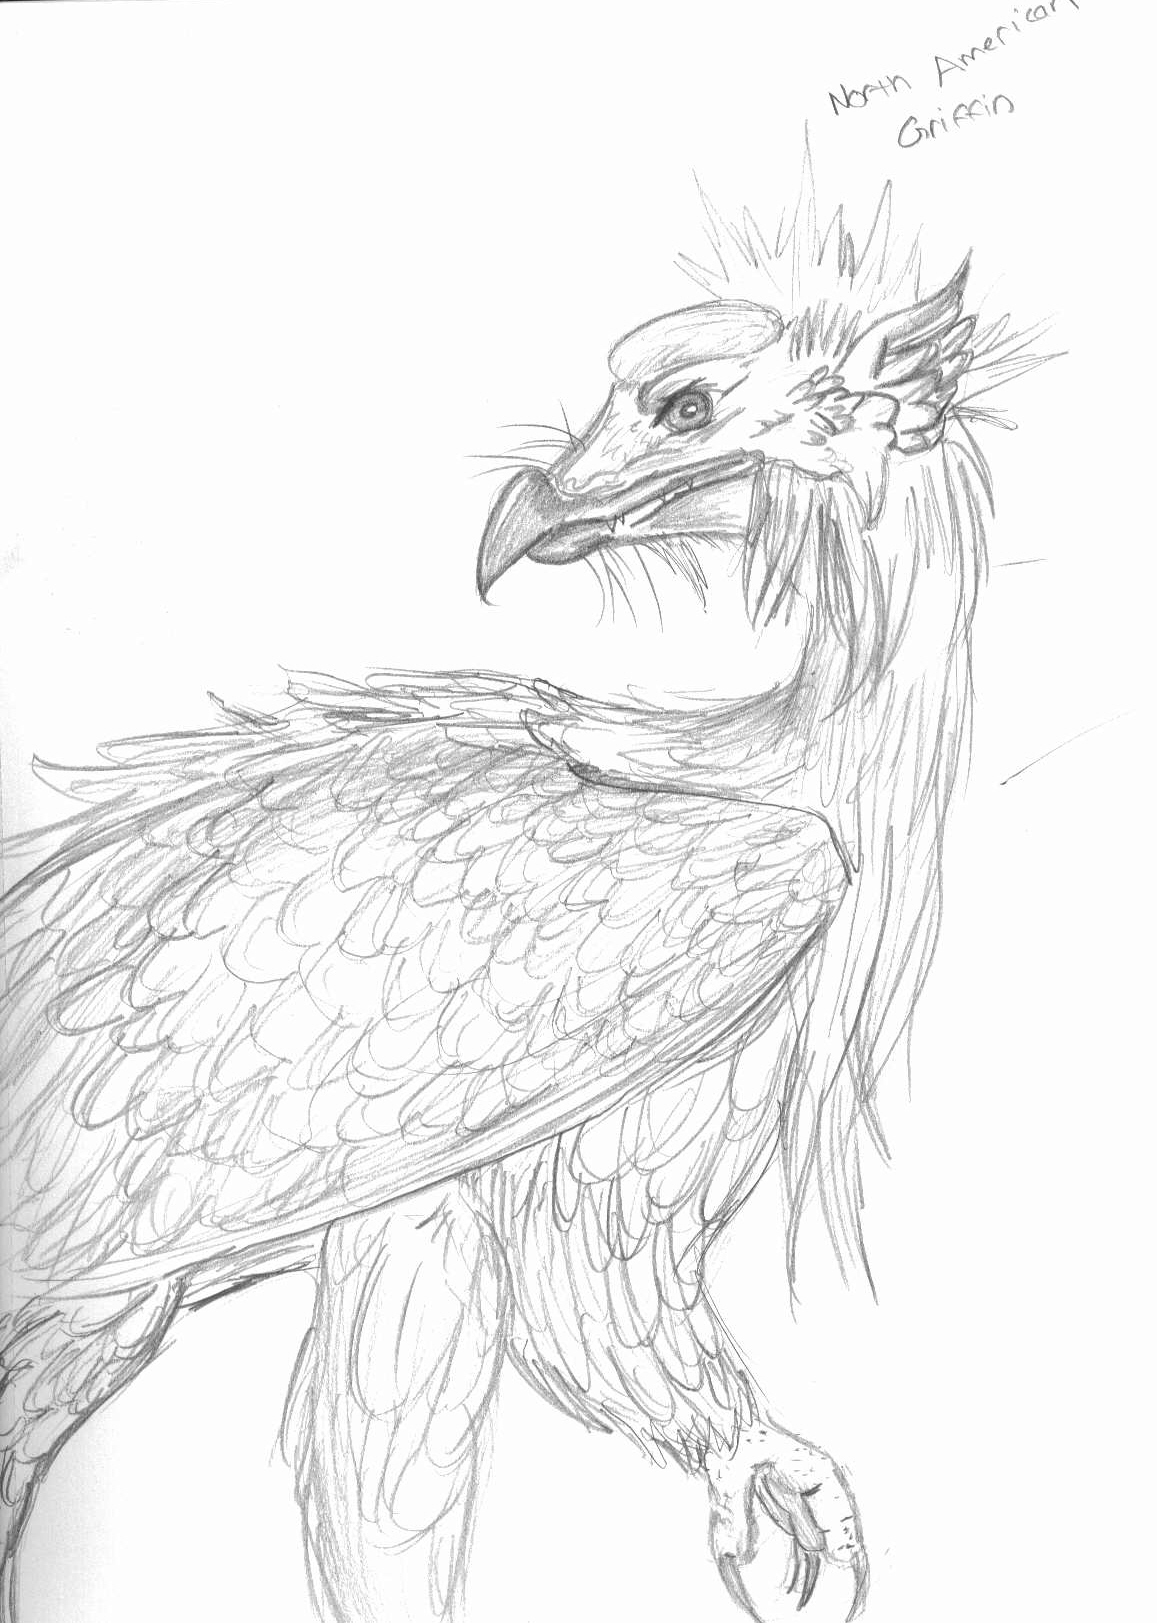 Griffin by missFangirl3432whee